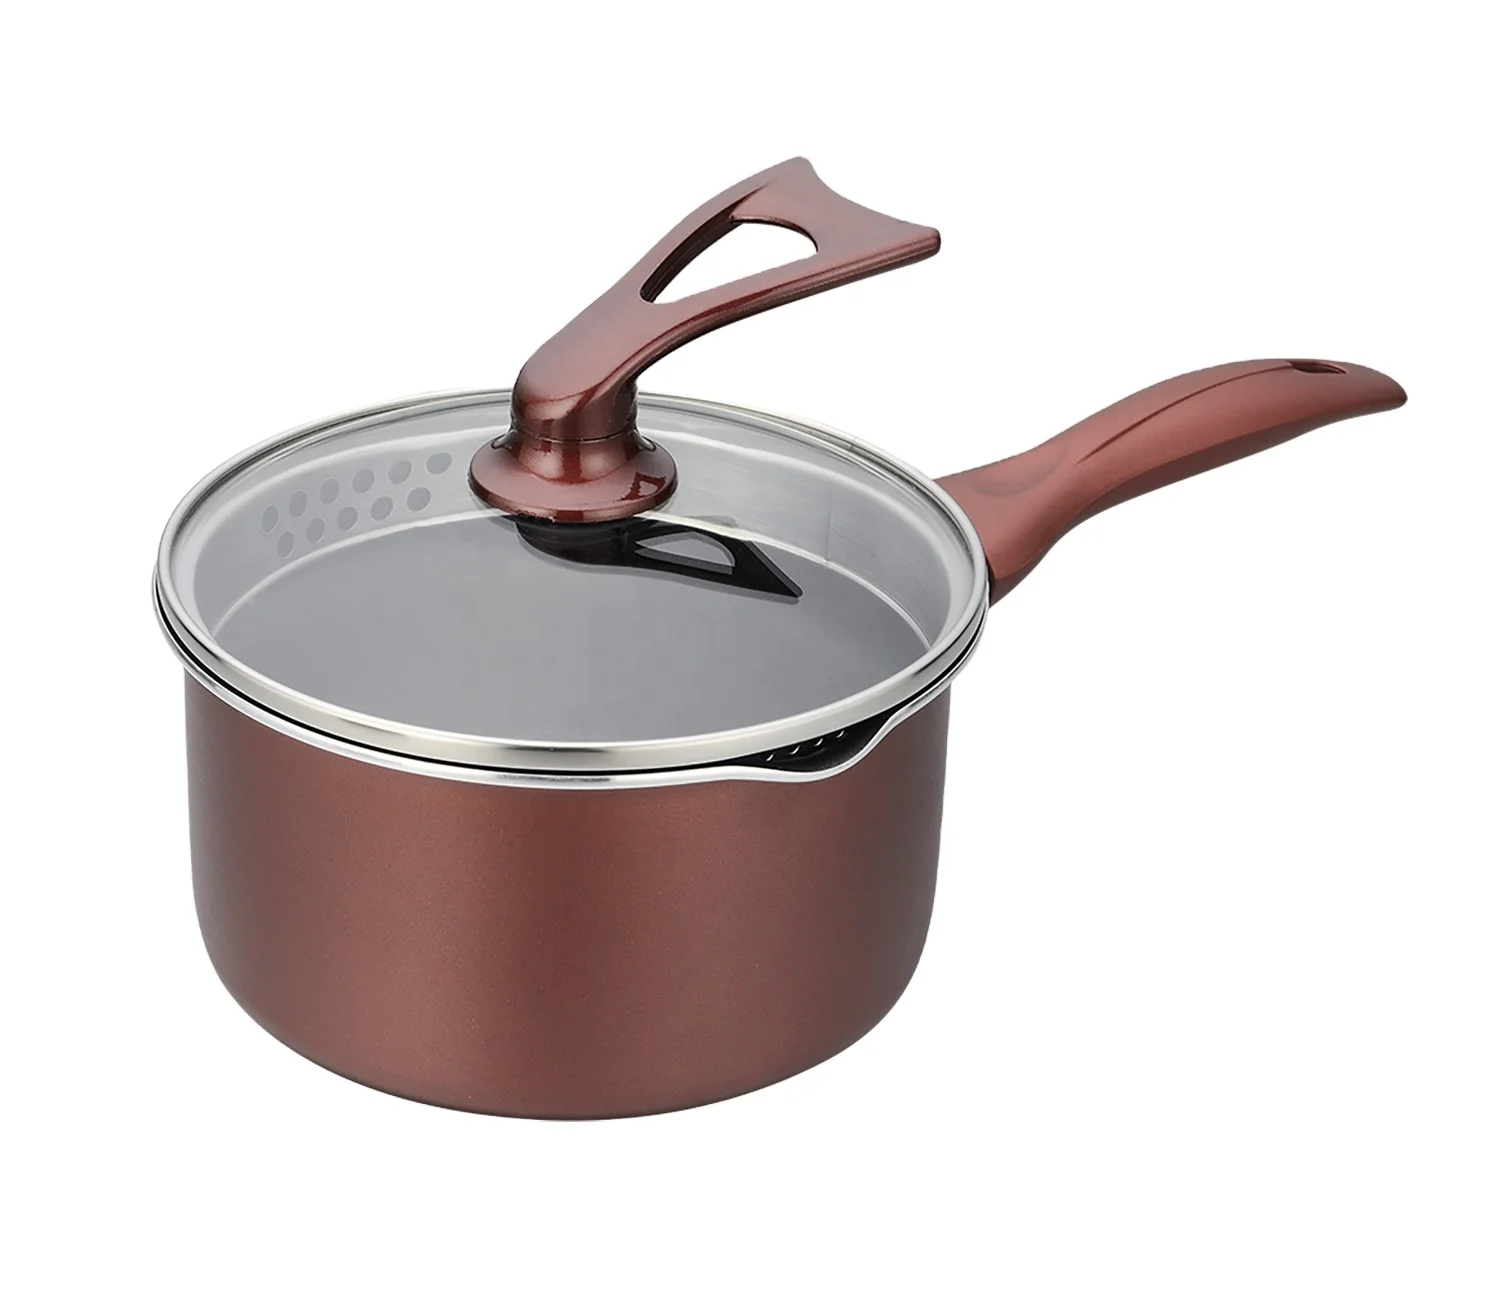 

Wholesale Hot Selling Kitchen Appliances Non-stick Cookware Sauce Pot Soup & Stock Pots Metal Kitchen Usage Cooking Home Cooking, Customized color